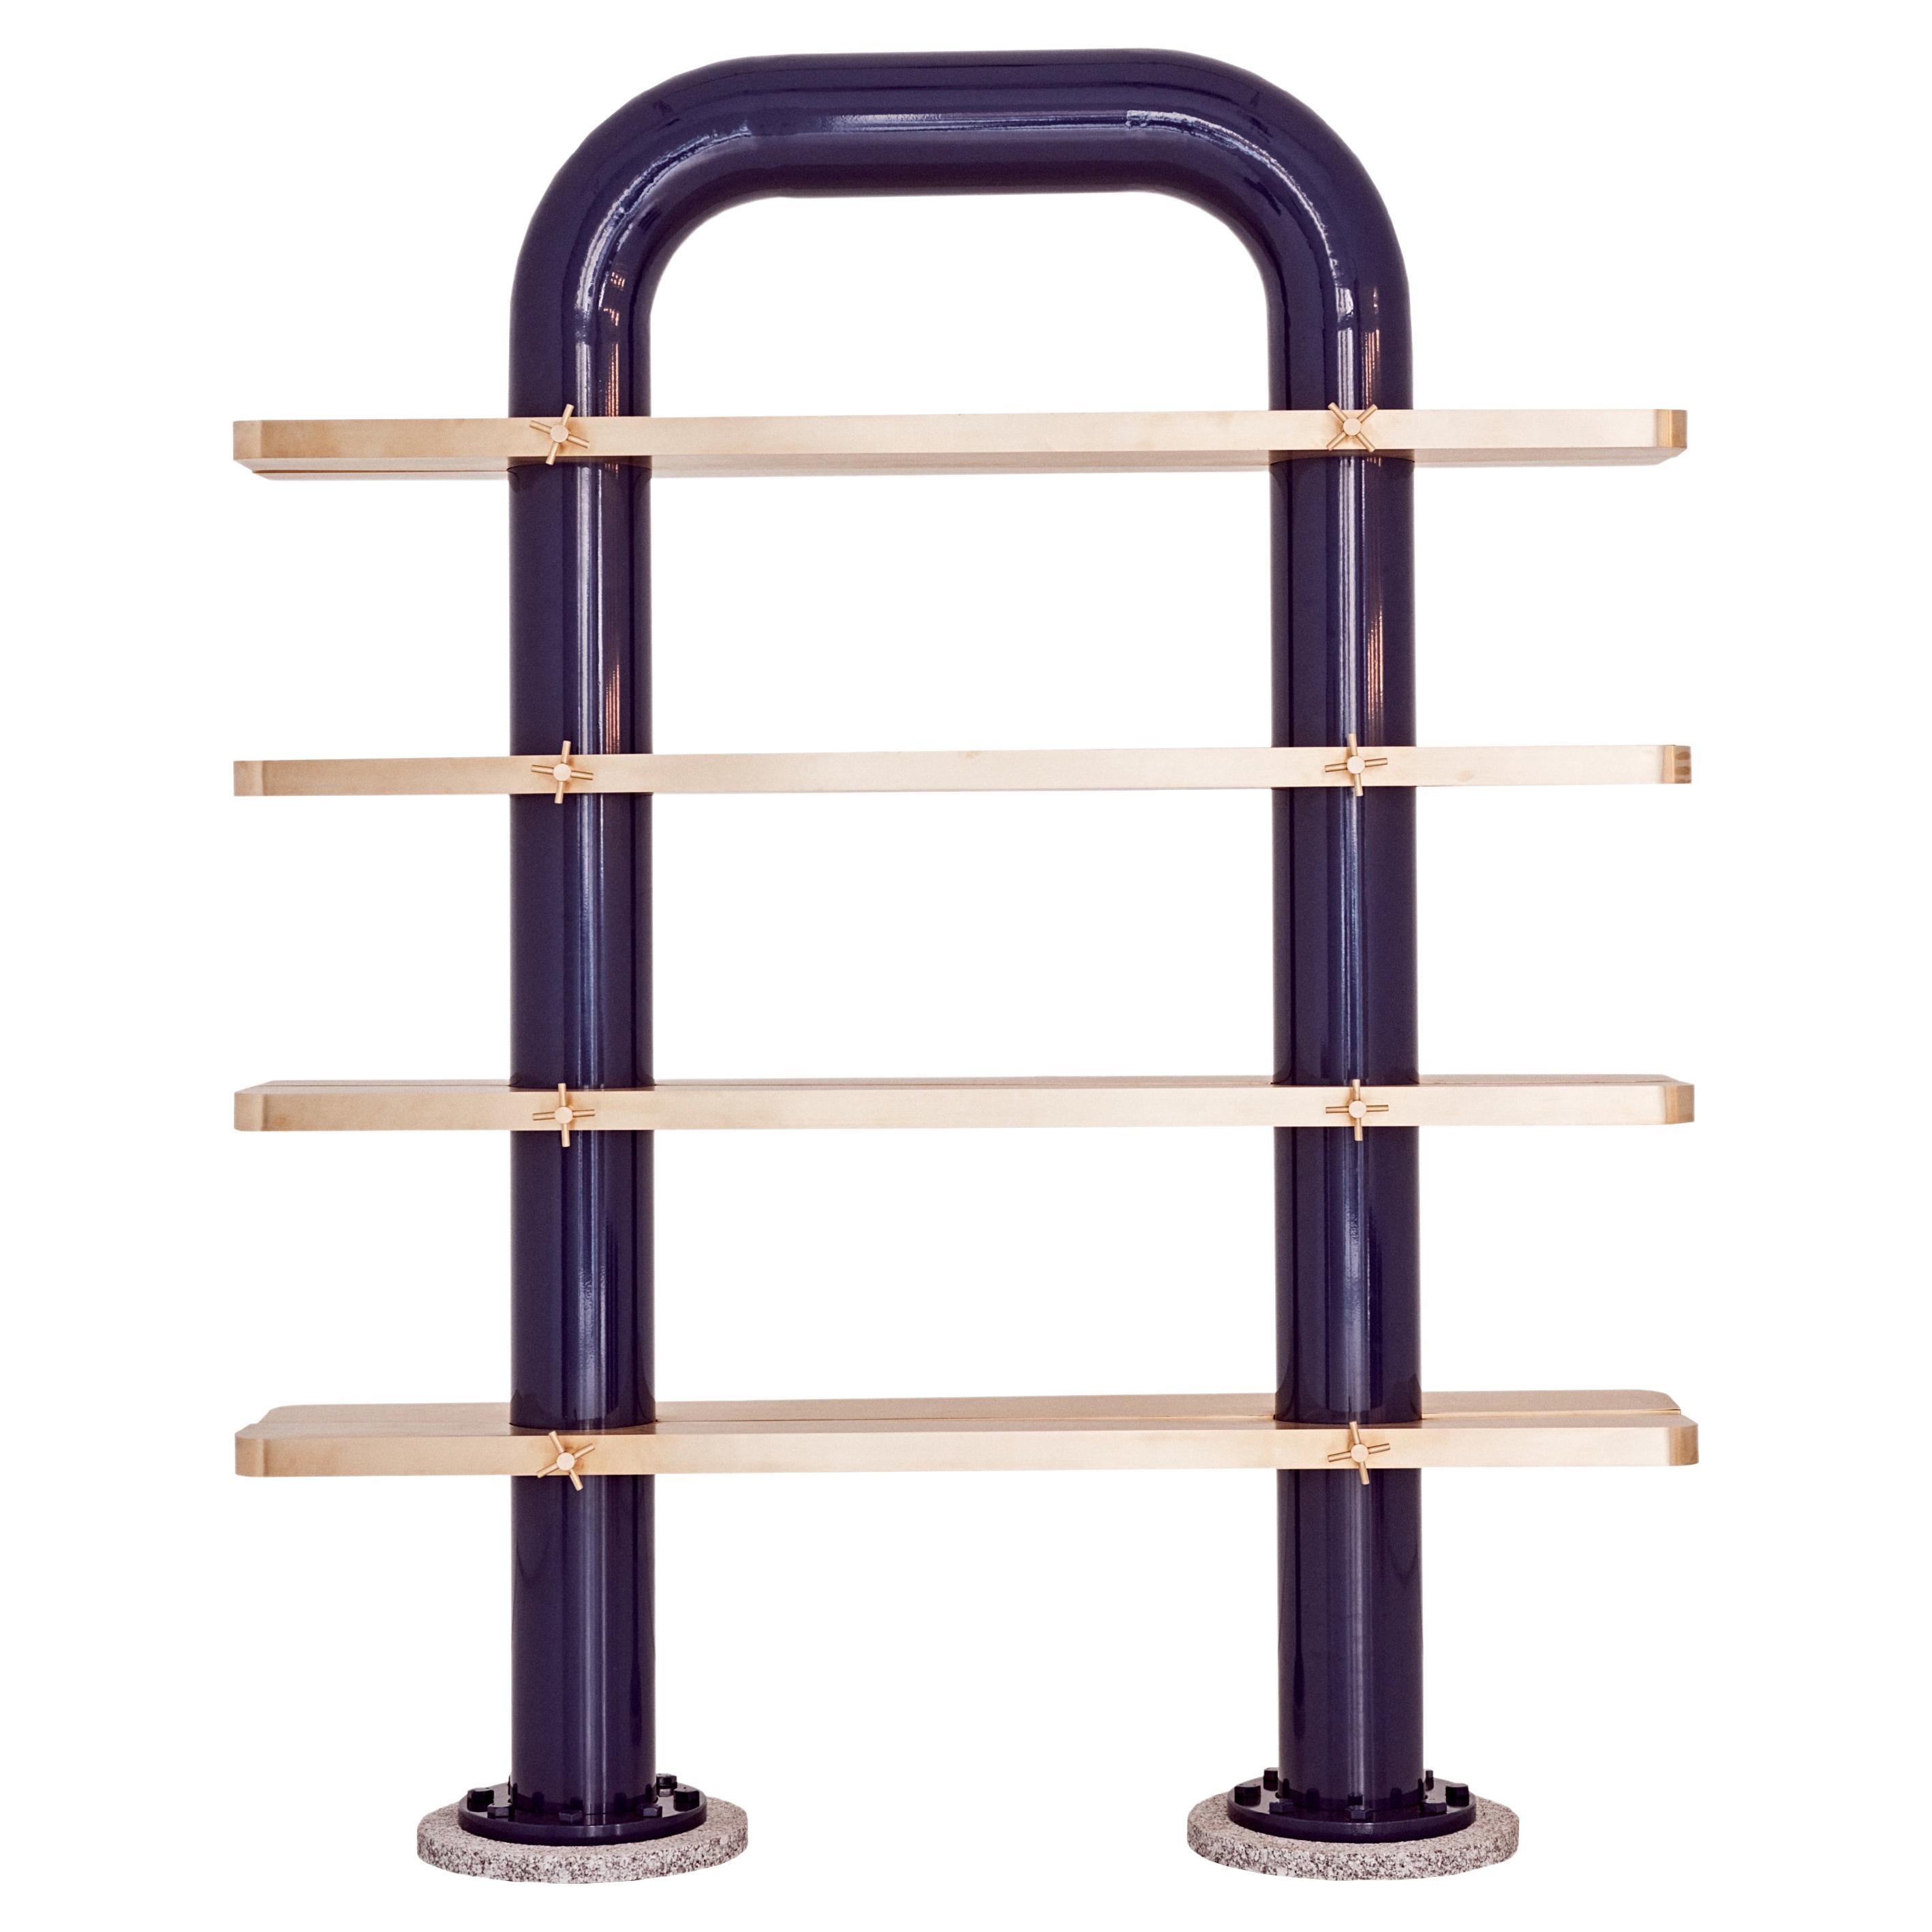 Temporal Collection, Limited Edition, Brass & Steel Shelve by Lucas Muñoz Muñoz